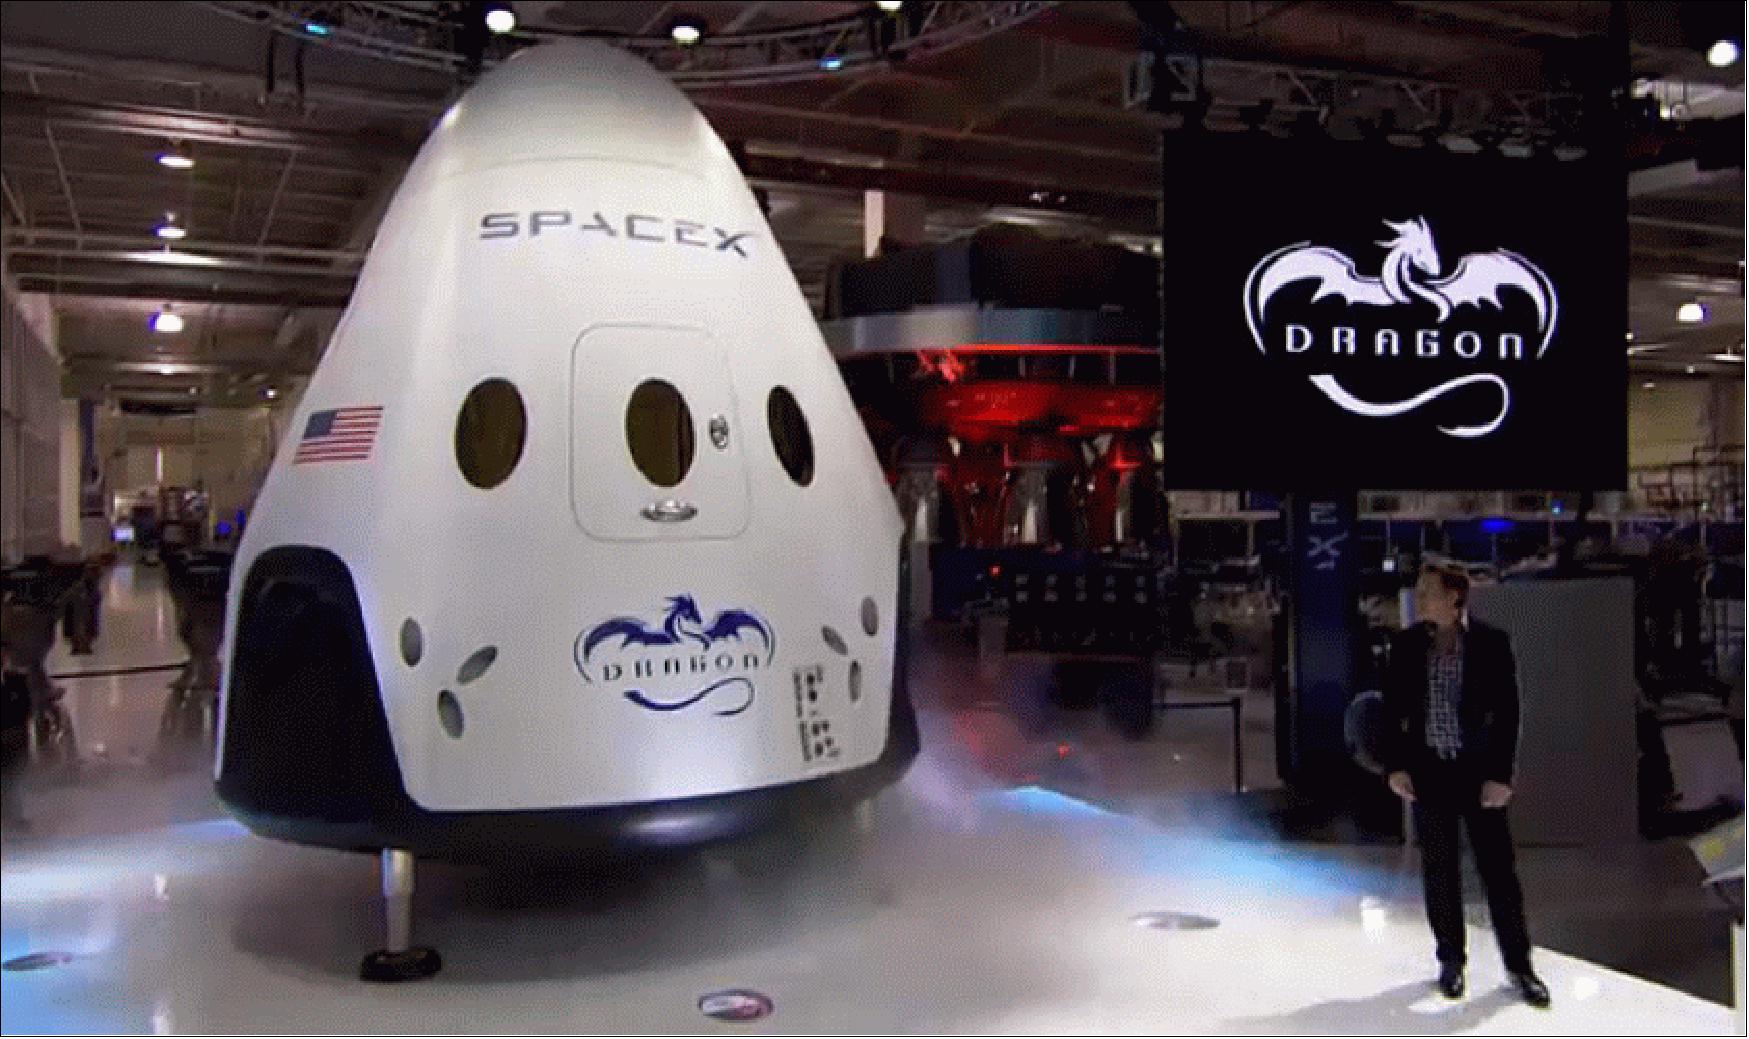 Figure 1: Photo of the Dragon V2 astronaut transporter model (image credit: SpaceX)